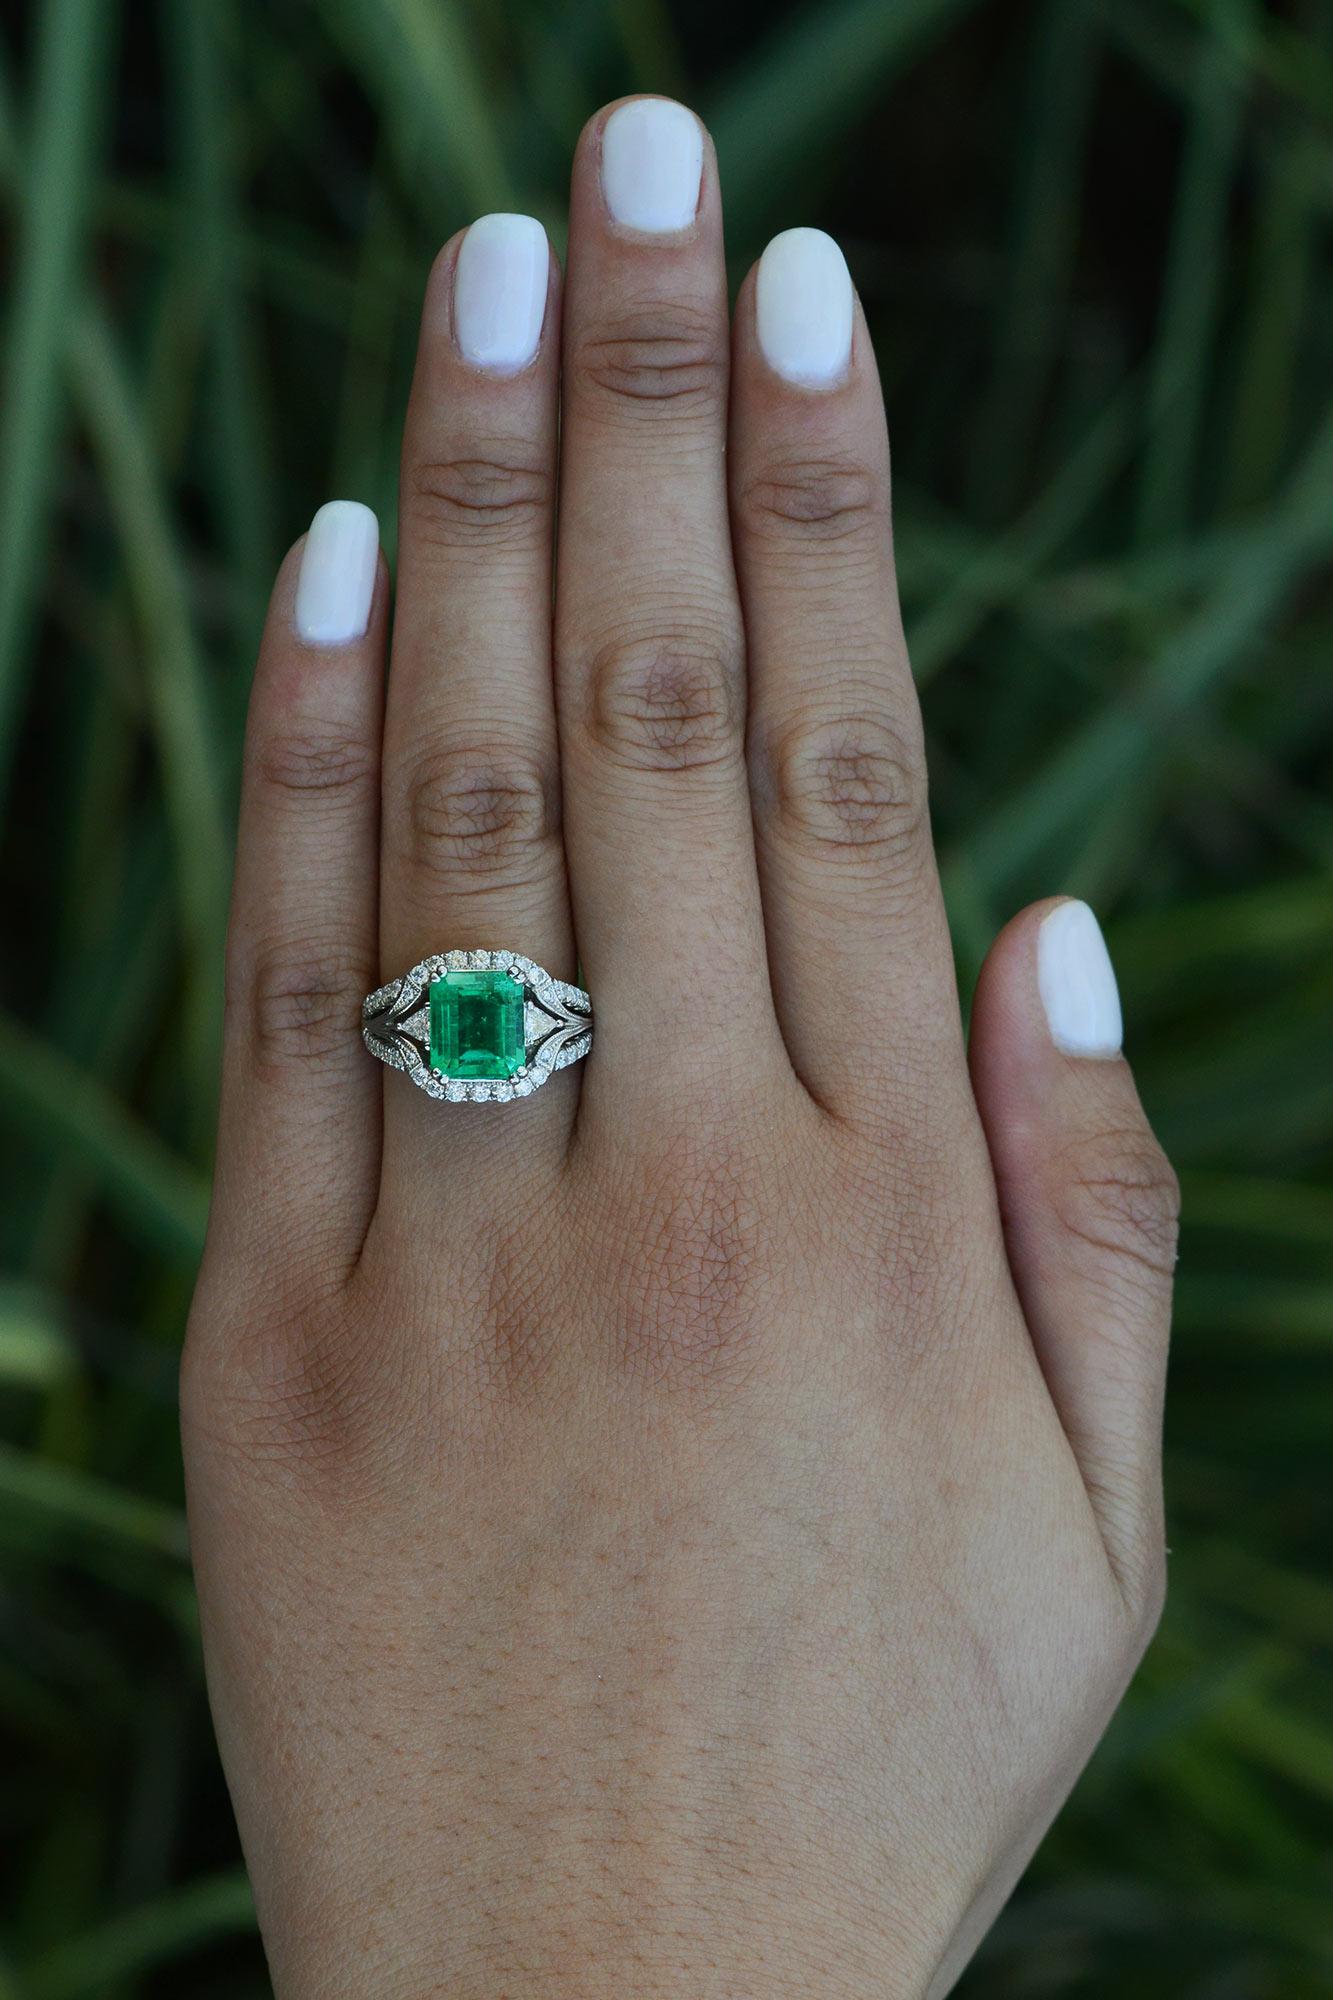 A magnificent emerald is exhibited in this vintage 18k white gold ring. Displaying a ravishing bright tone peering out of over 1 carat of prominent diamonds all showcased in a notable openwork design. The 1980s were a pivotal time for jewelry and